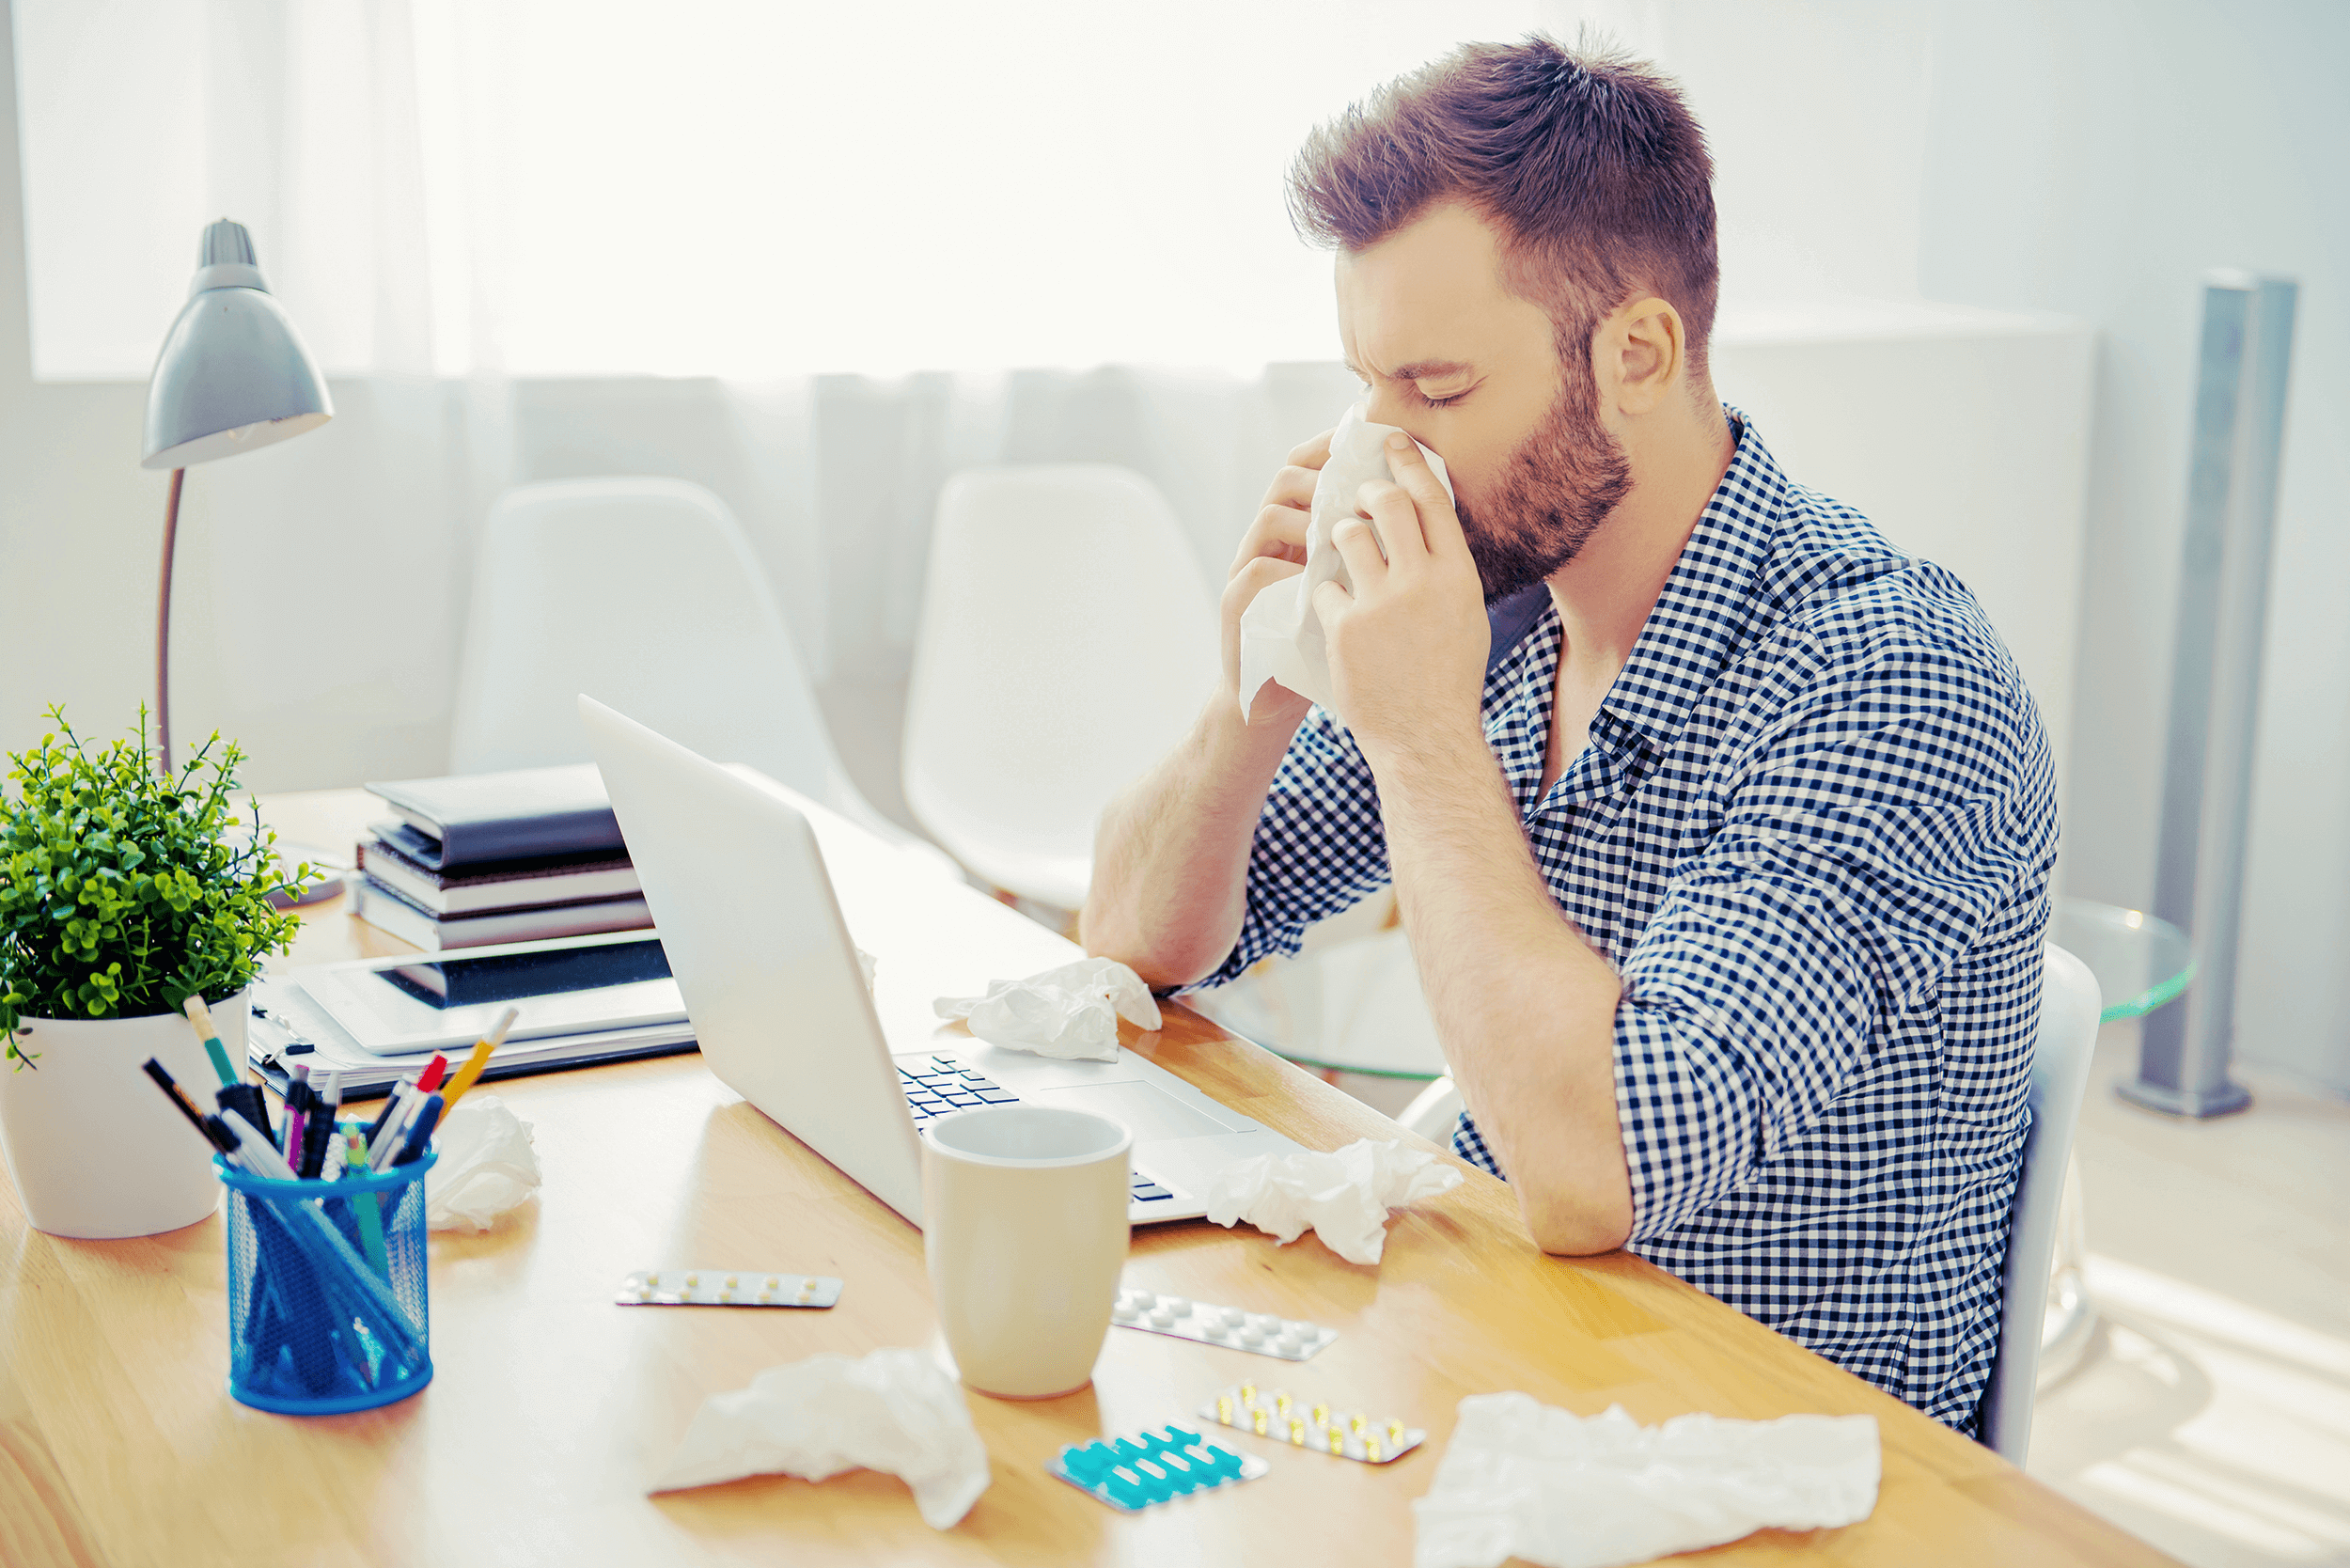 a man working on a laptop blowing his nose in to tissues